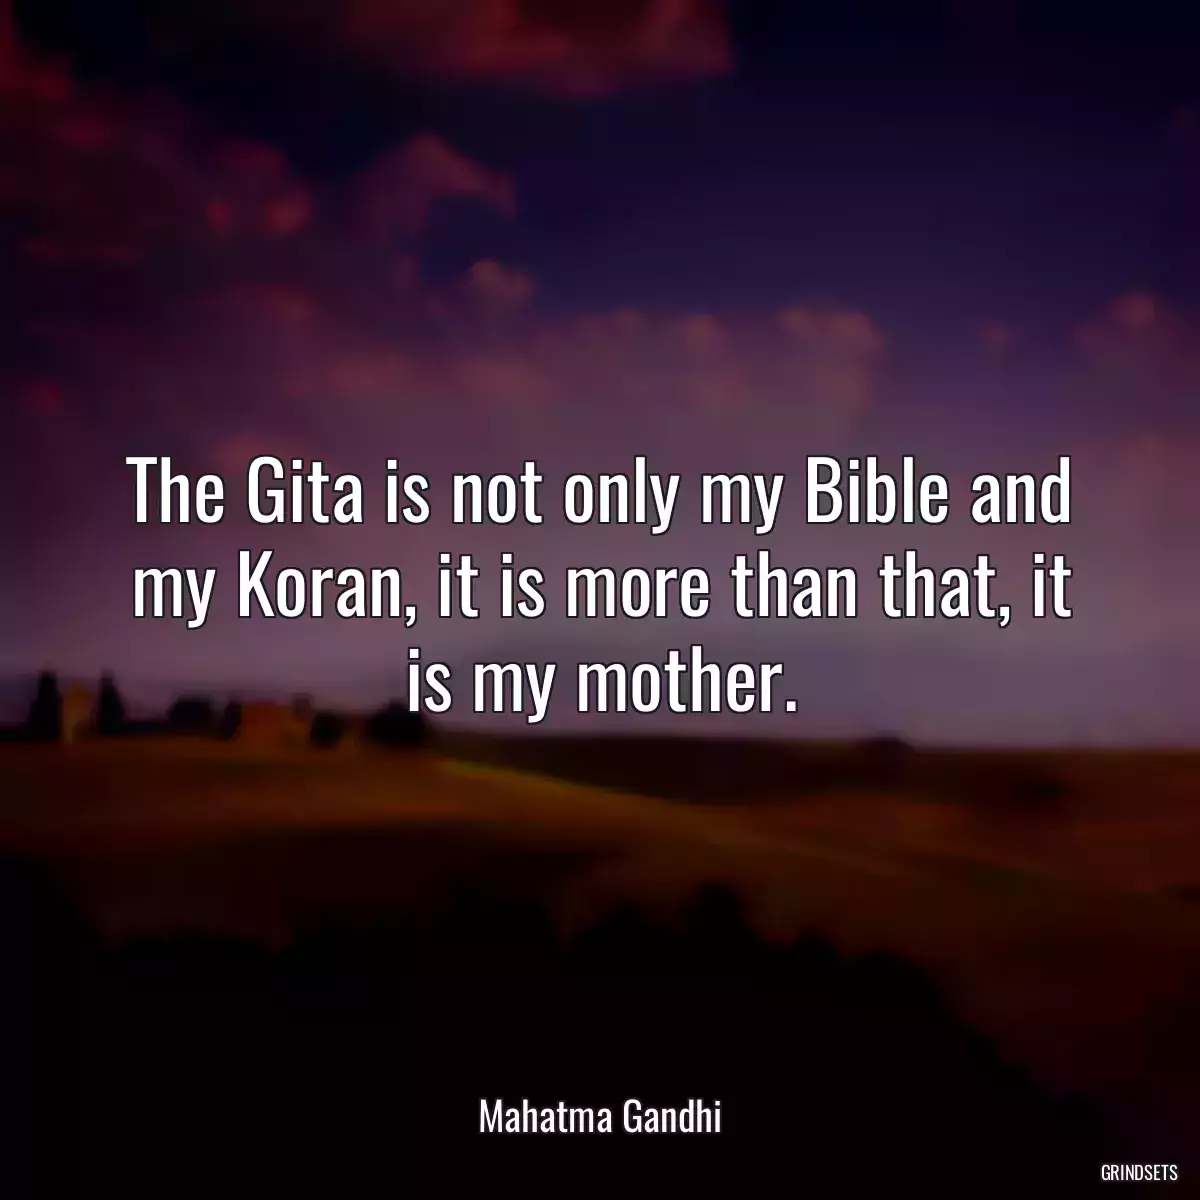 The Gita is not only my Bible and my Koran, it is more than that, it is my mother.